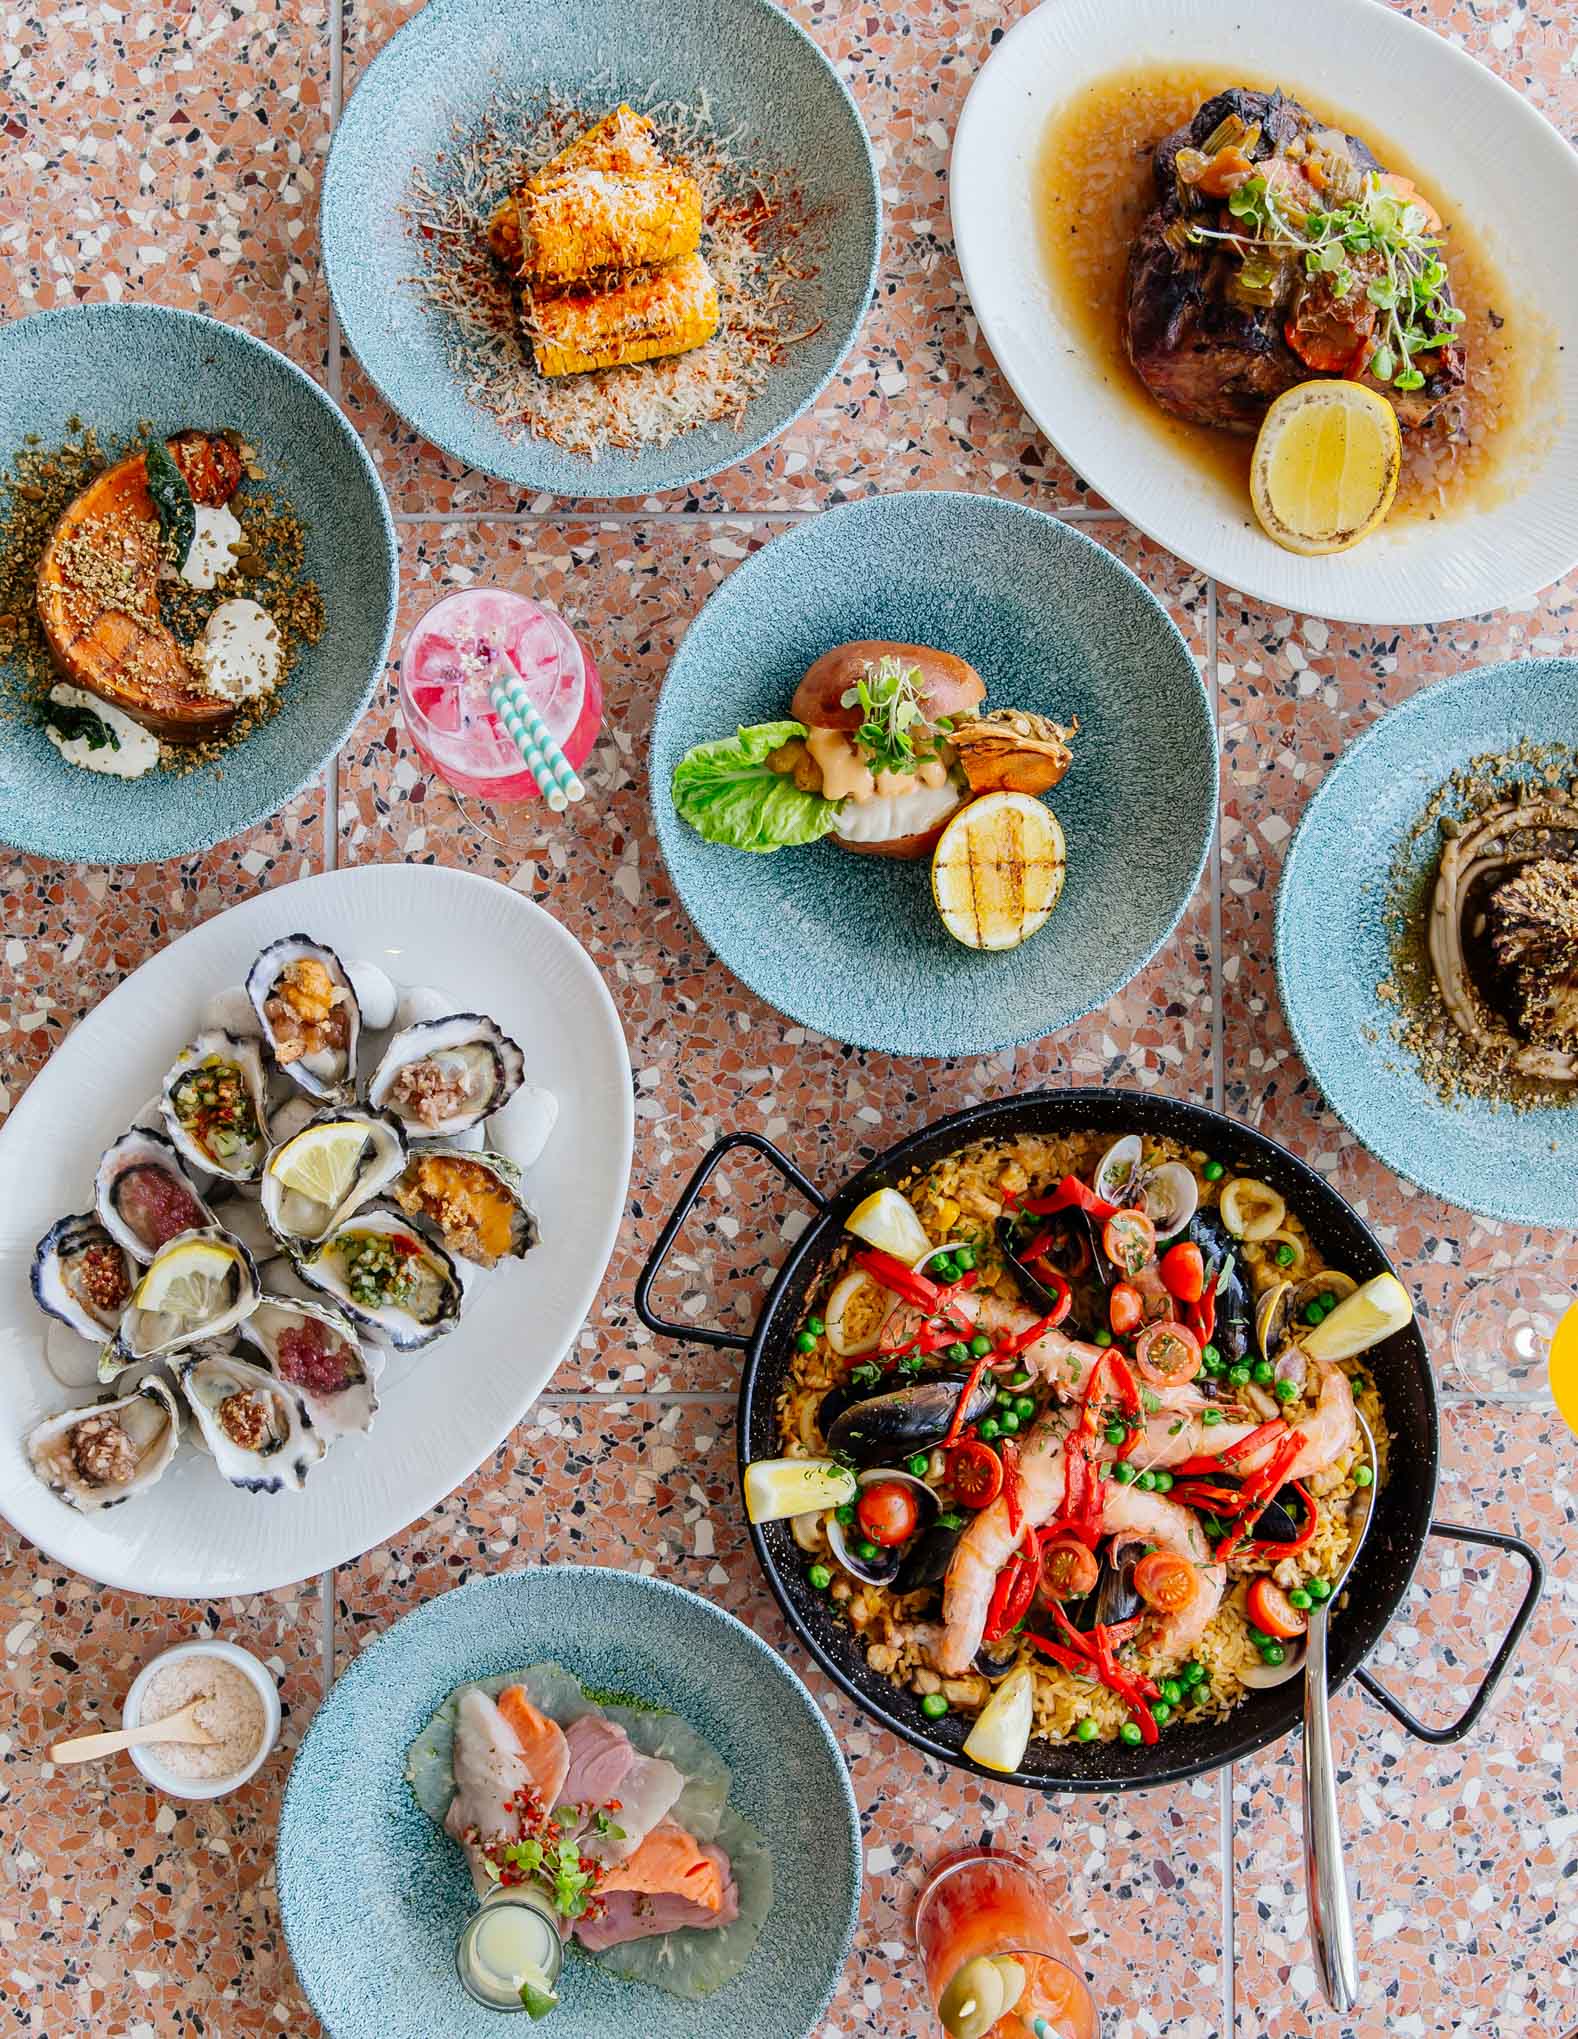 Brisbane restaurants, Brisbane food, Mecca Bah, DannyBoys, Ovolo the Valley, S.K. Steak & Oyster, Bar Pacino, Stanley, Rico Bar and Dining, Eat Your Way Around The World In Brisbane 